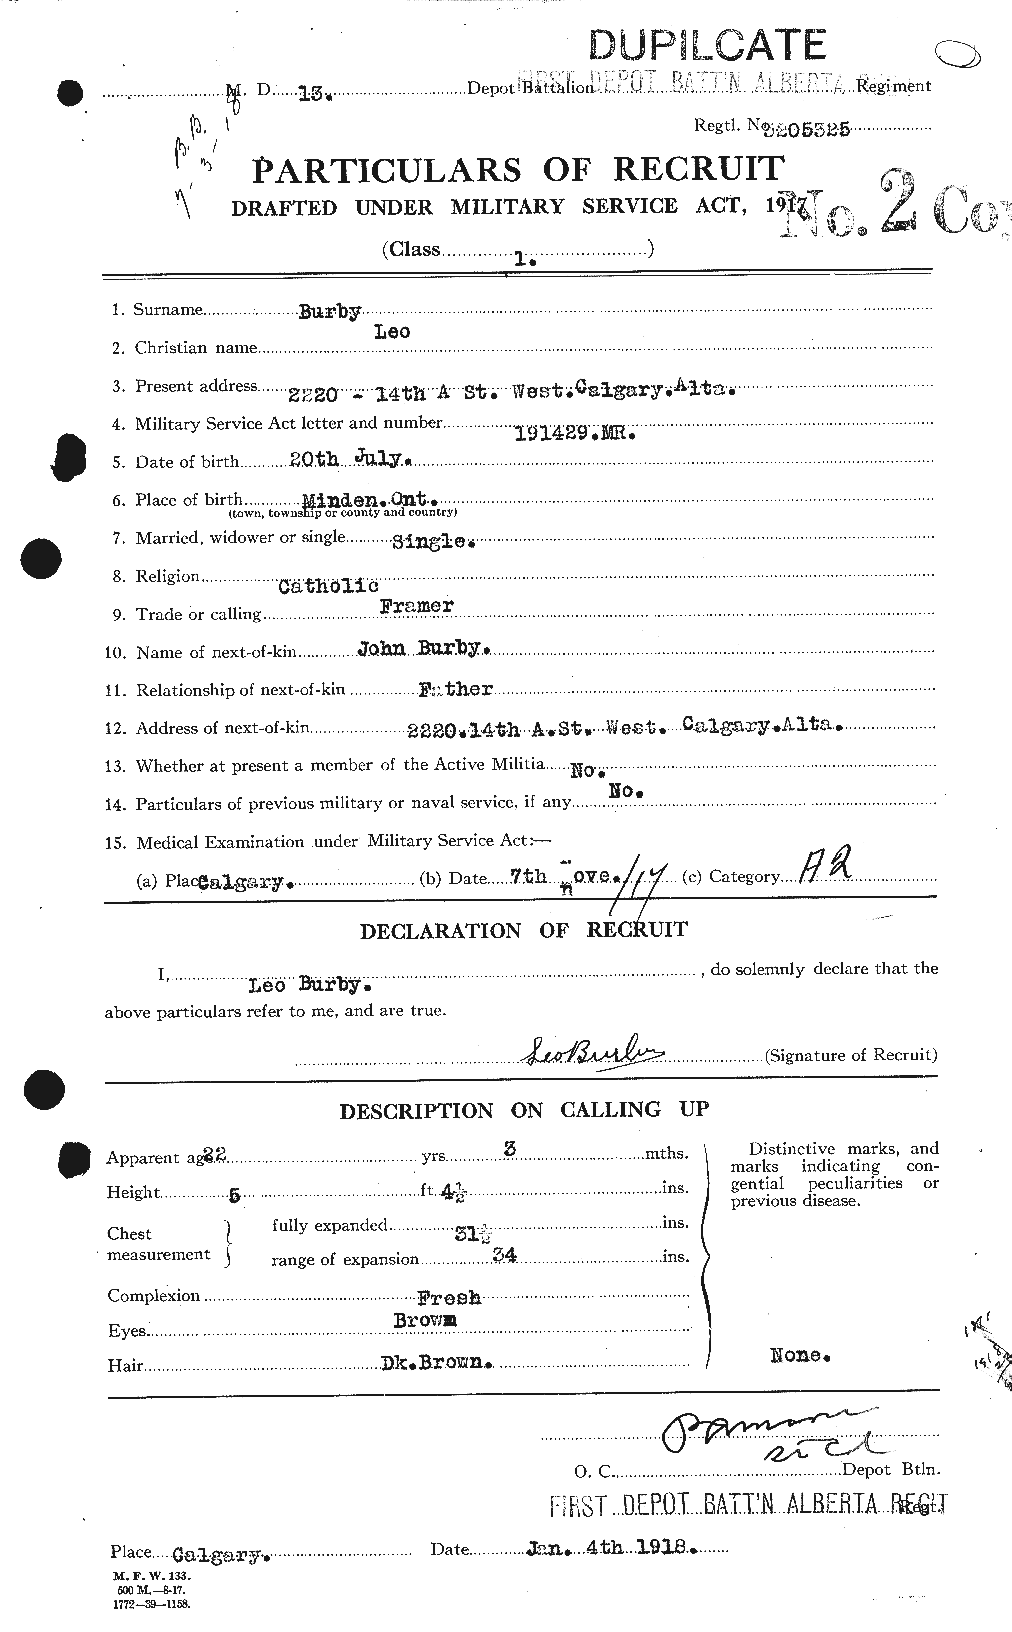 Personnel Records of the First World War - CEF 271068a